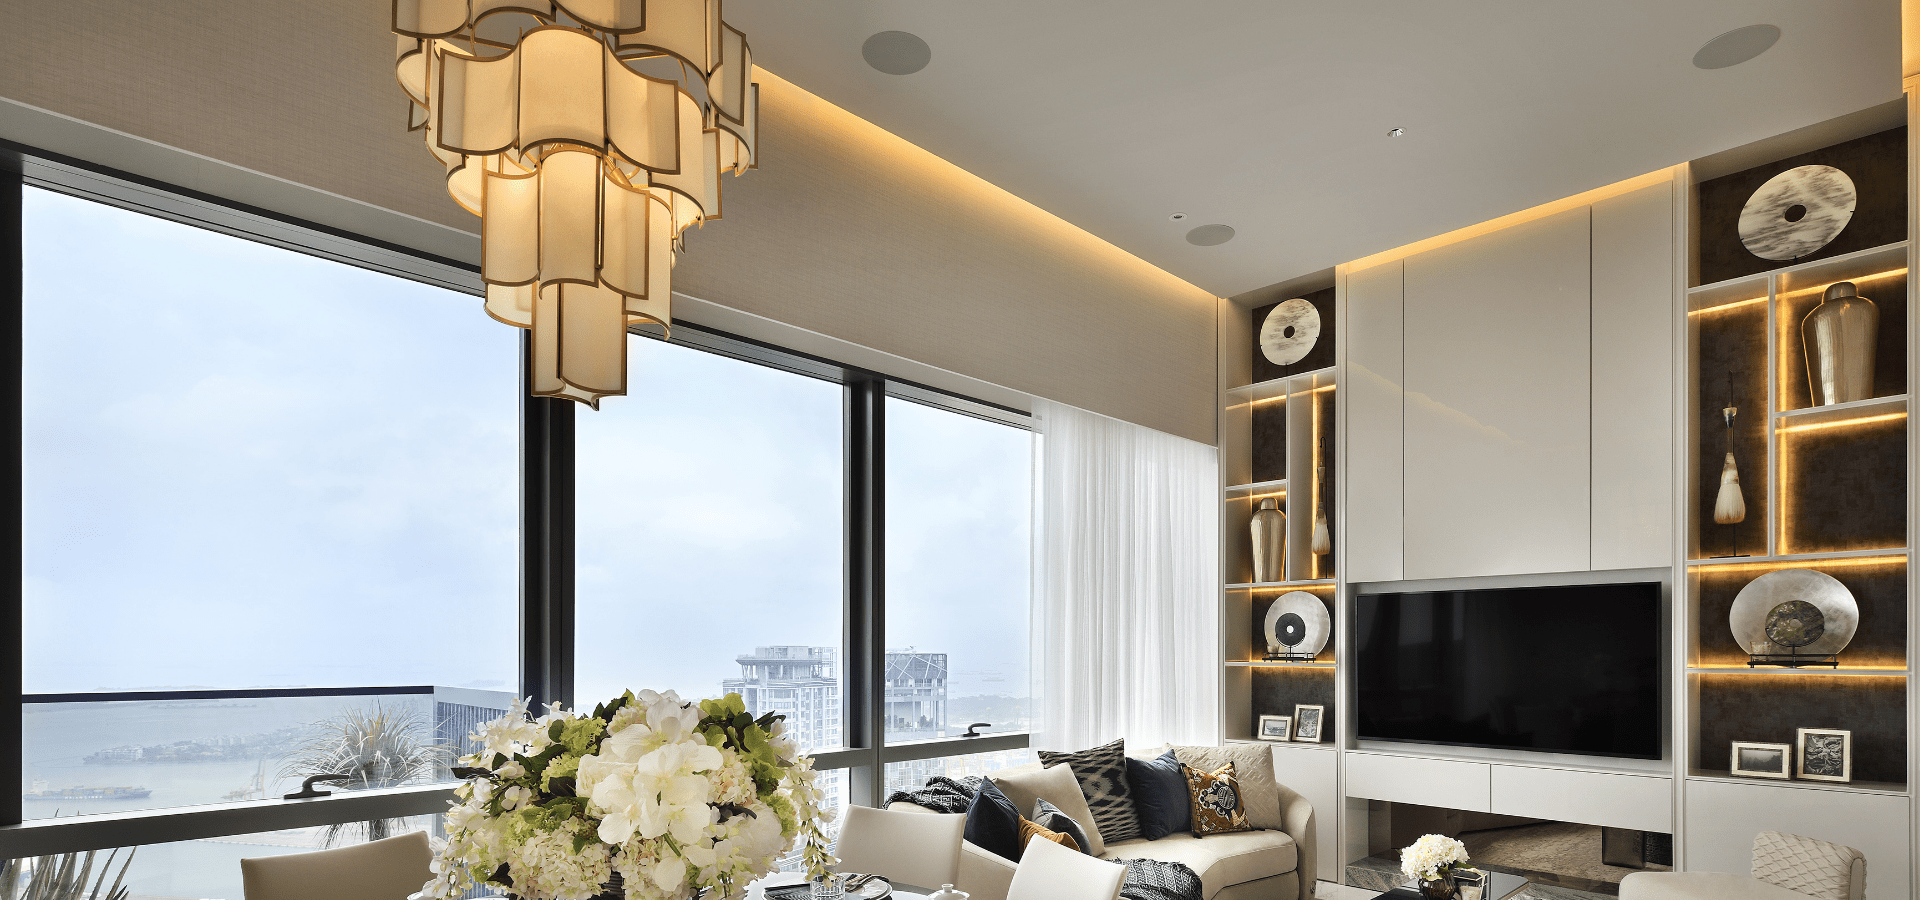 Modify Your Modern Luxury Home With An Interior Designer in Singapore